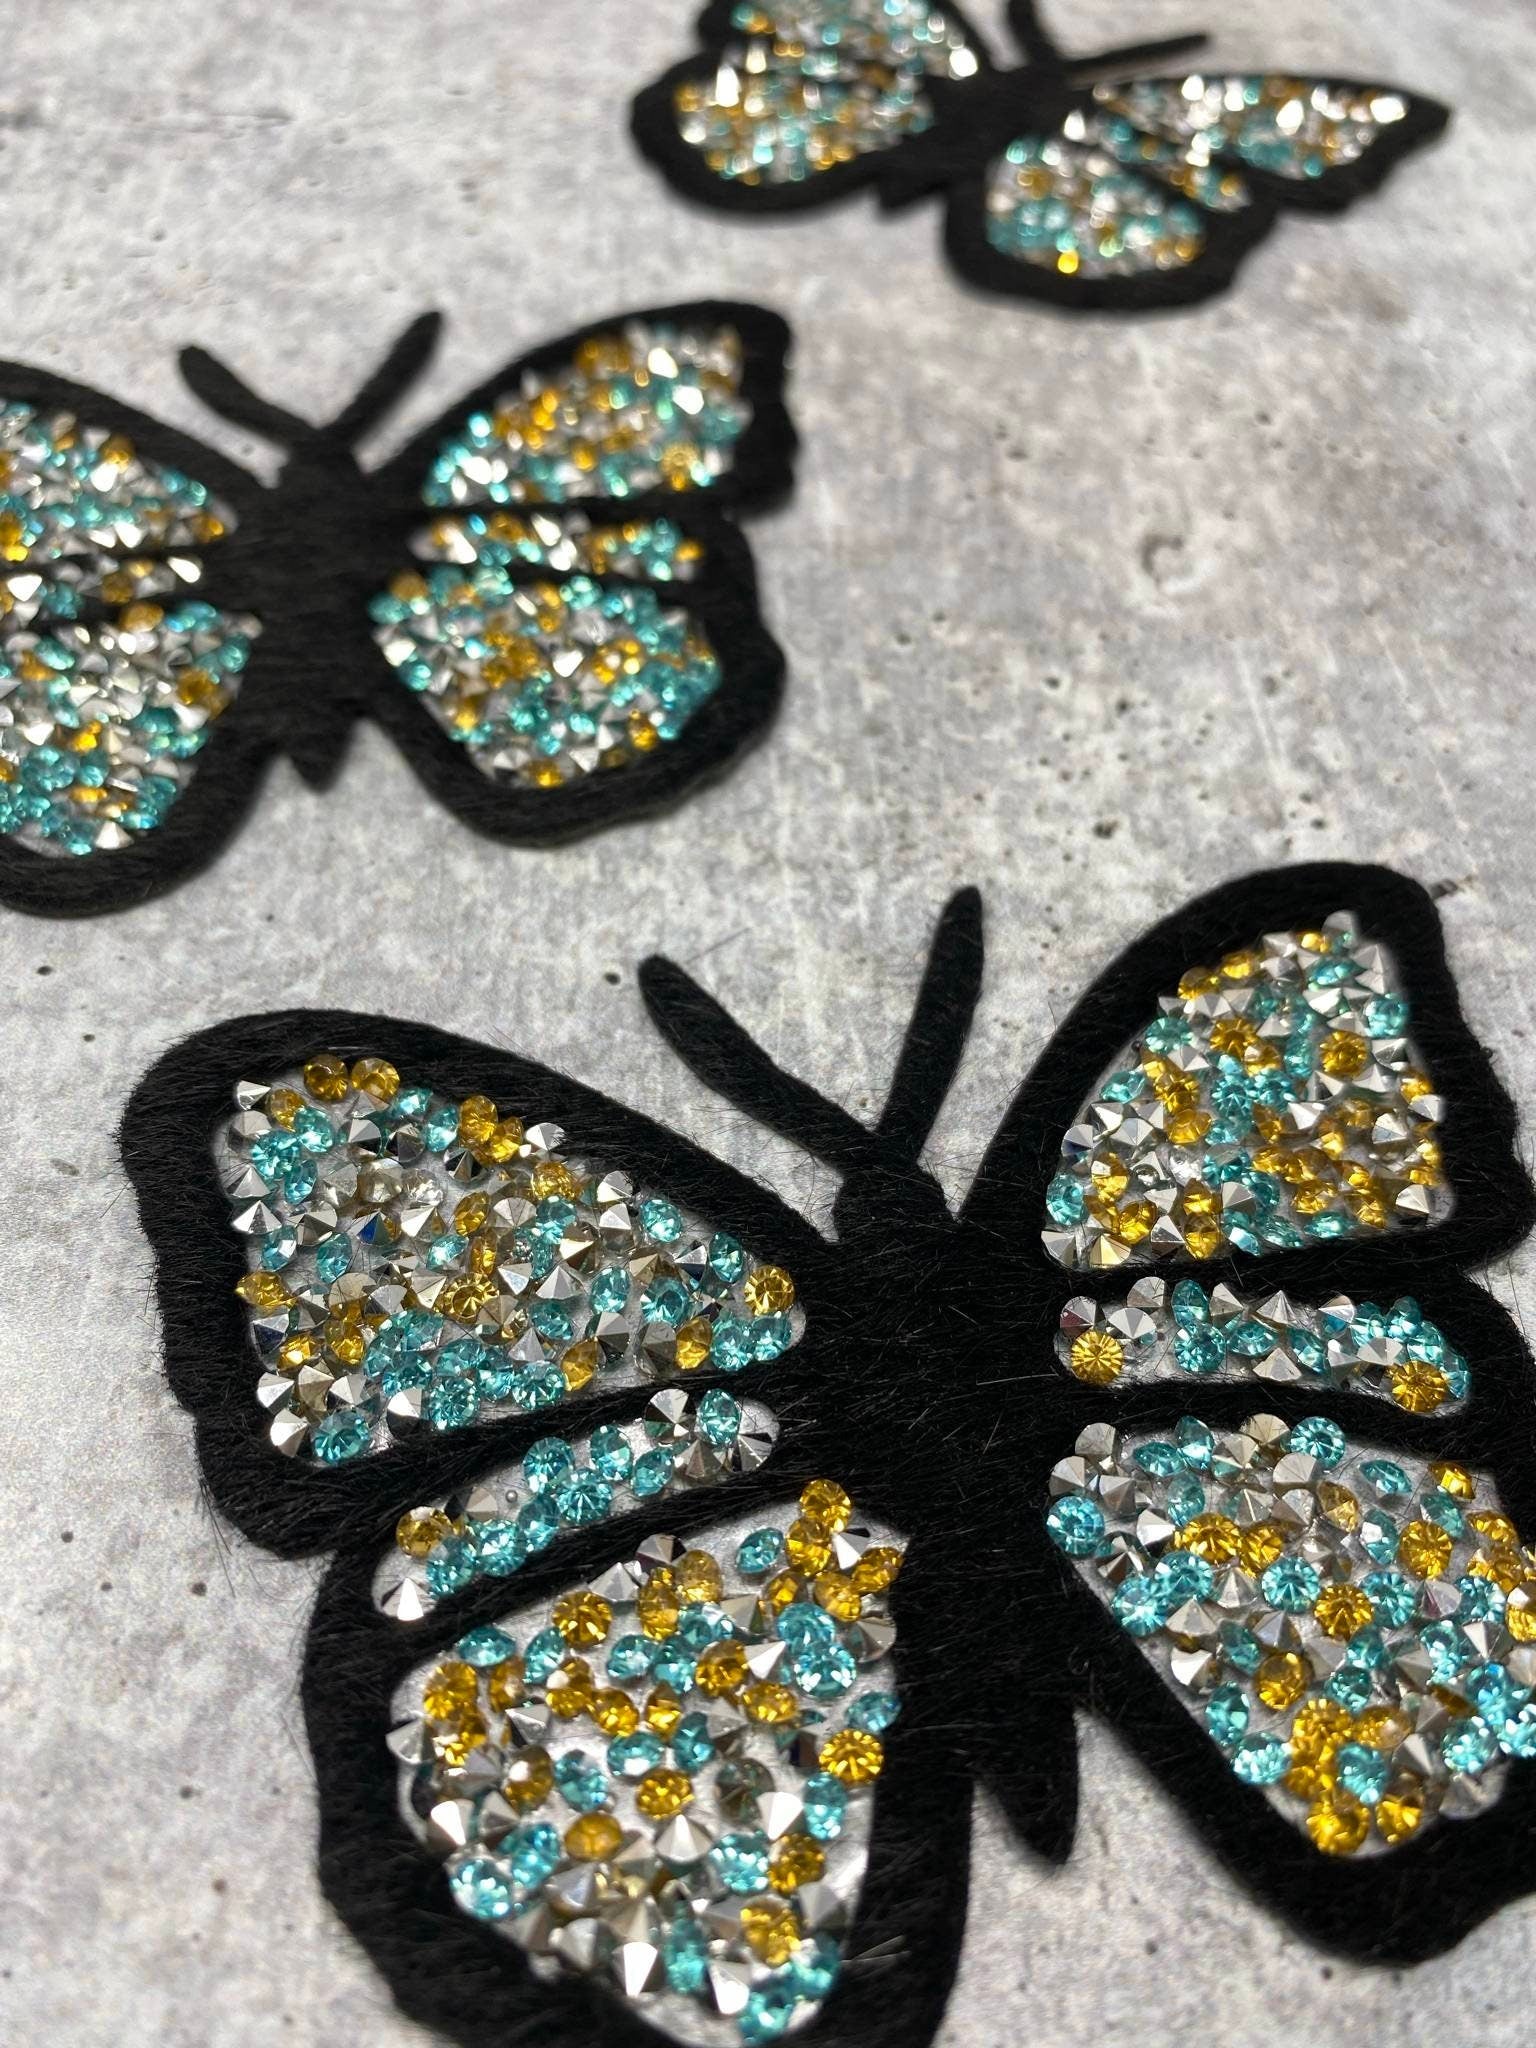 Exclusive, 1-pc,TEAL/GREEN "Butterfly" Bling Patch, Size 3", Cool Applique For Clothing, Iron-on Patch, Small Patch for Jackets, DIY